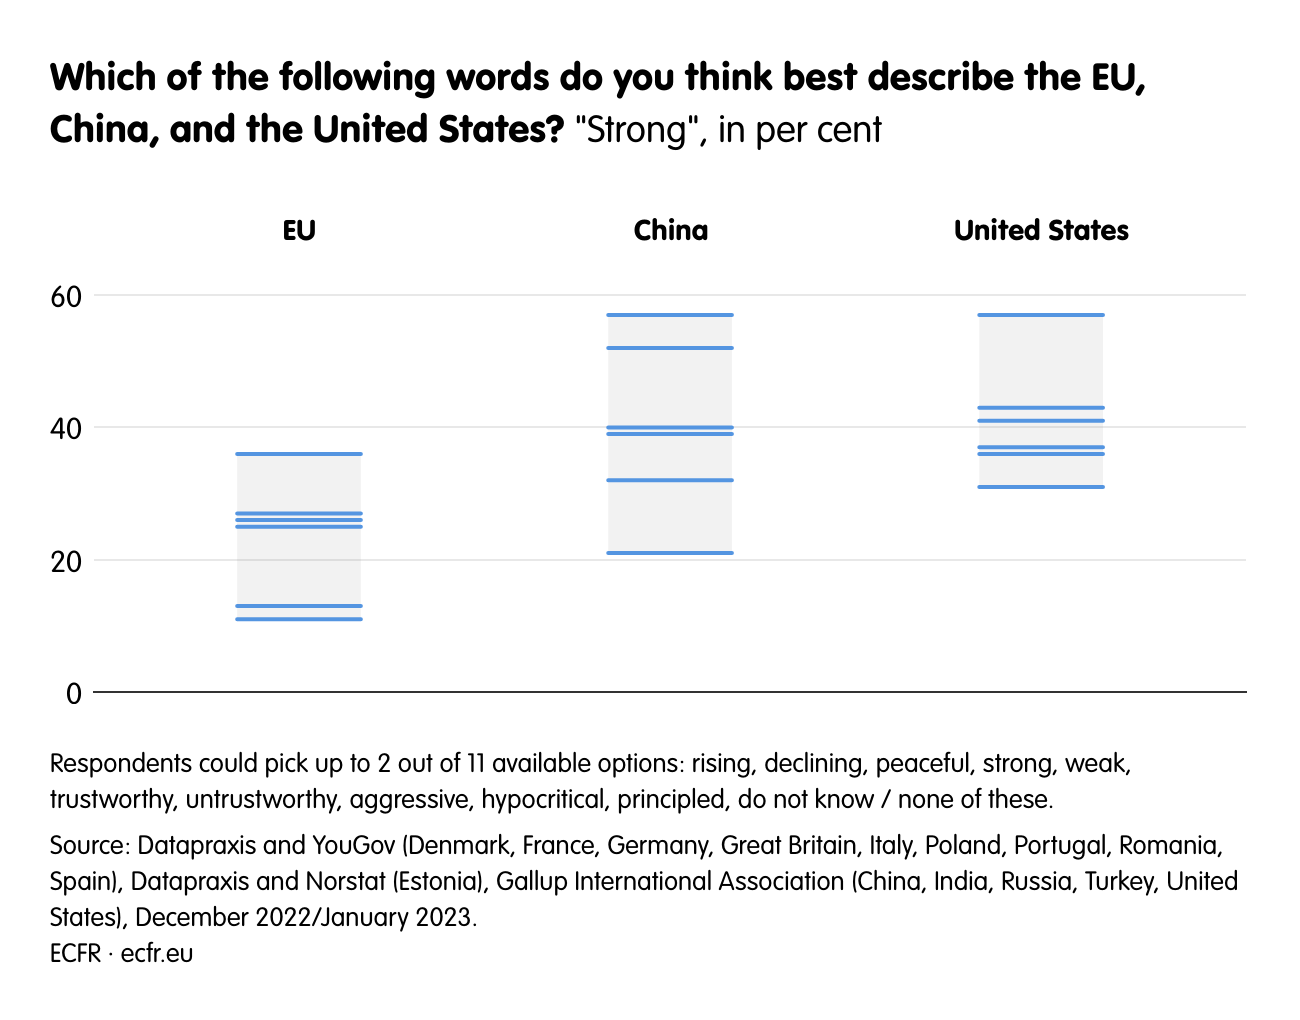 Which of the following words do you think best describe the EU, China, and United States?